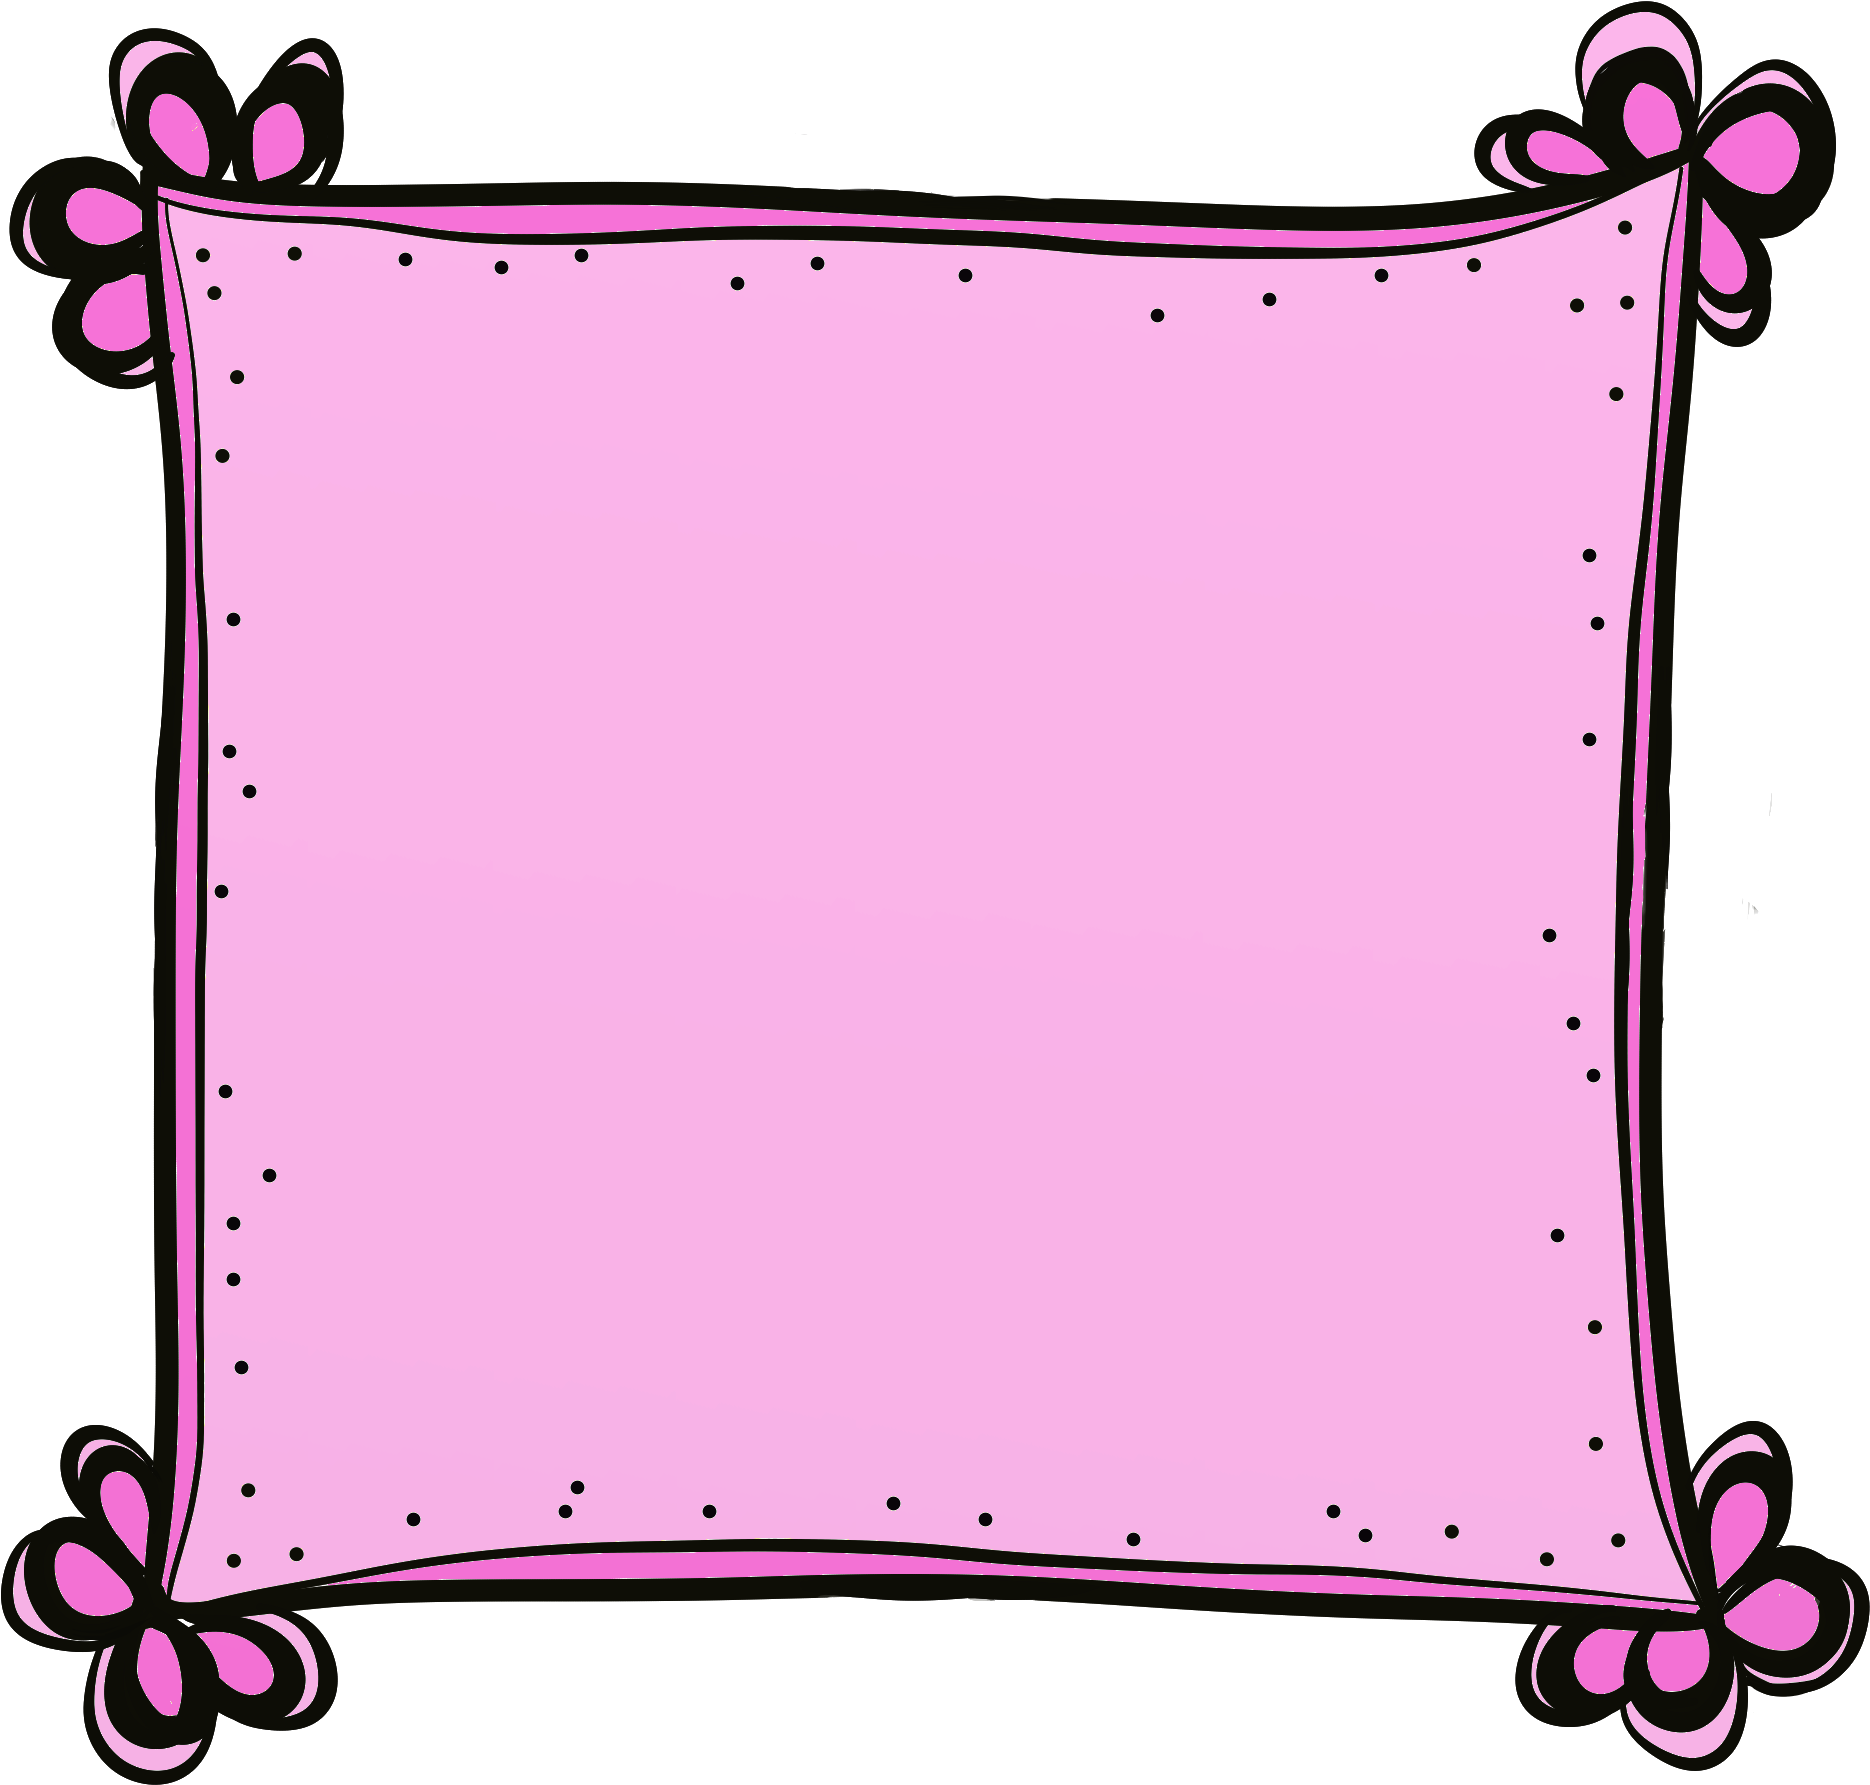 Cute Frames Borders And Frames Art Clipart Free